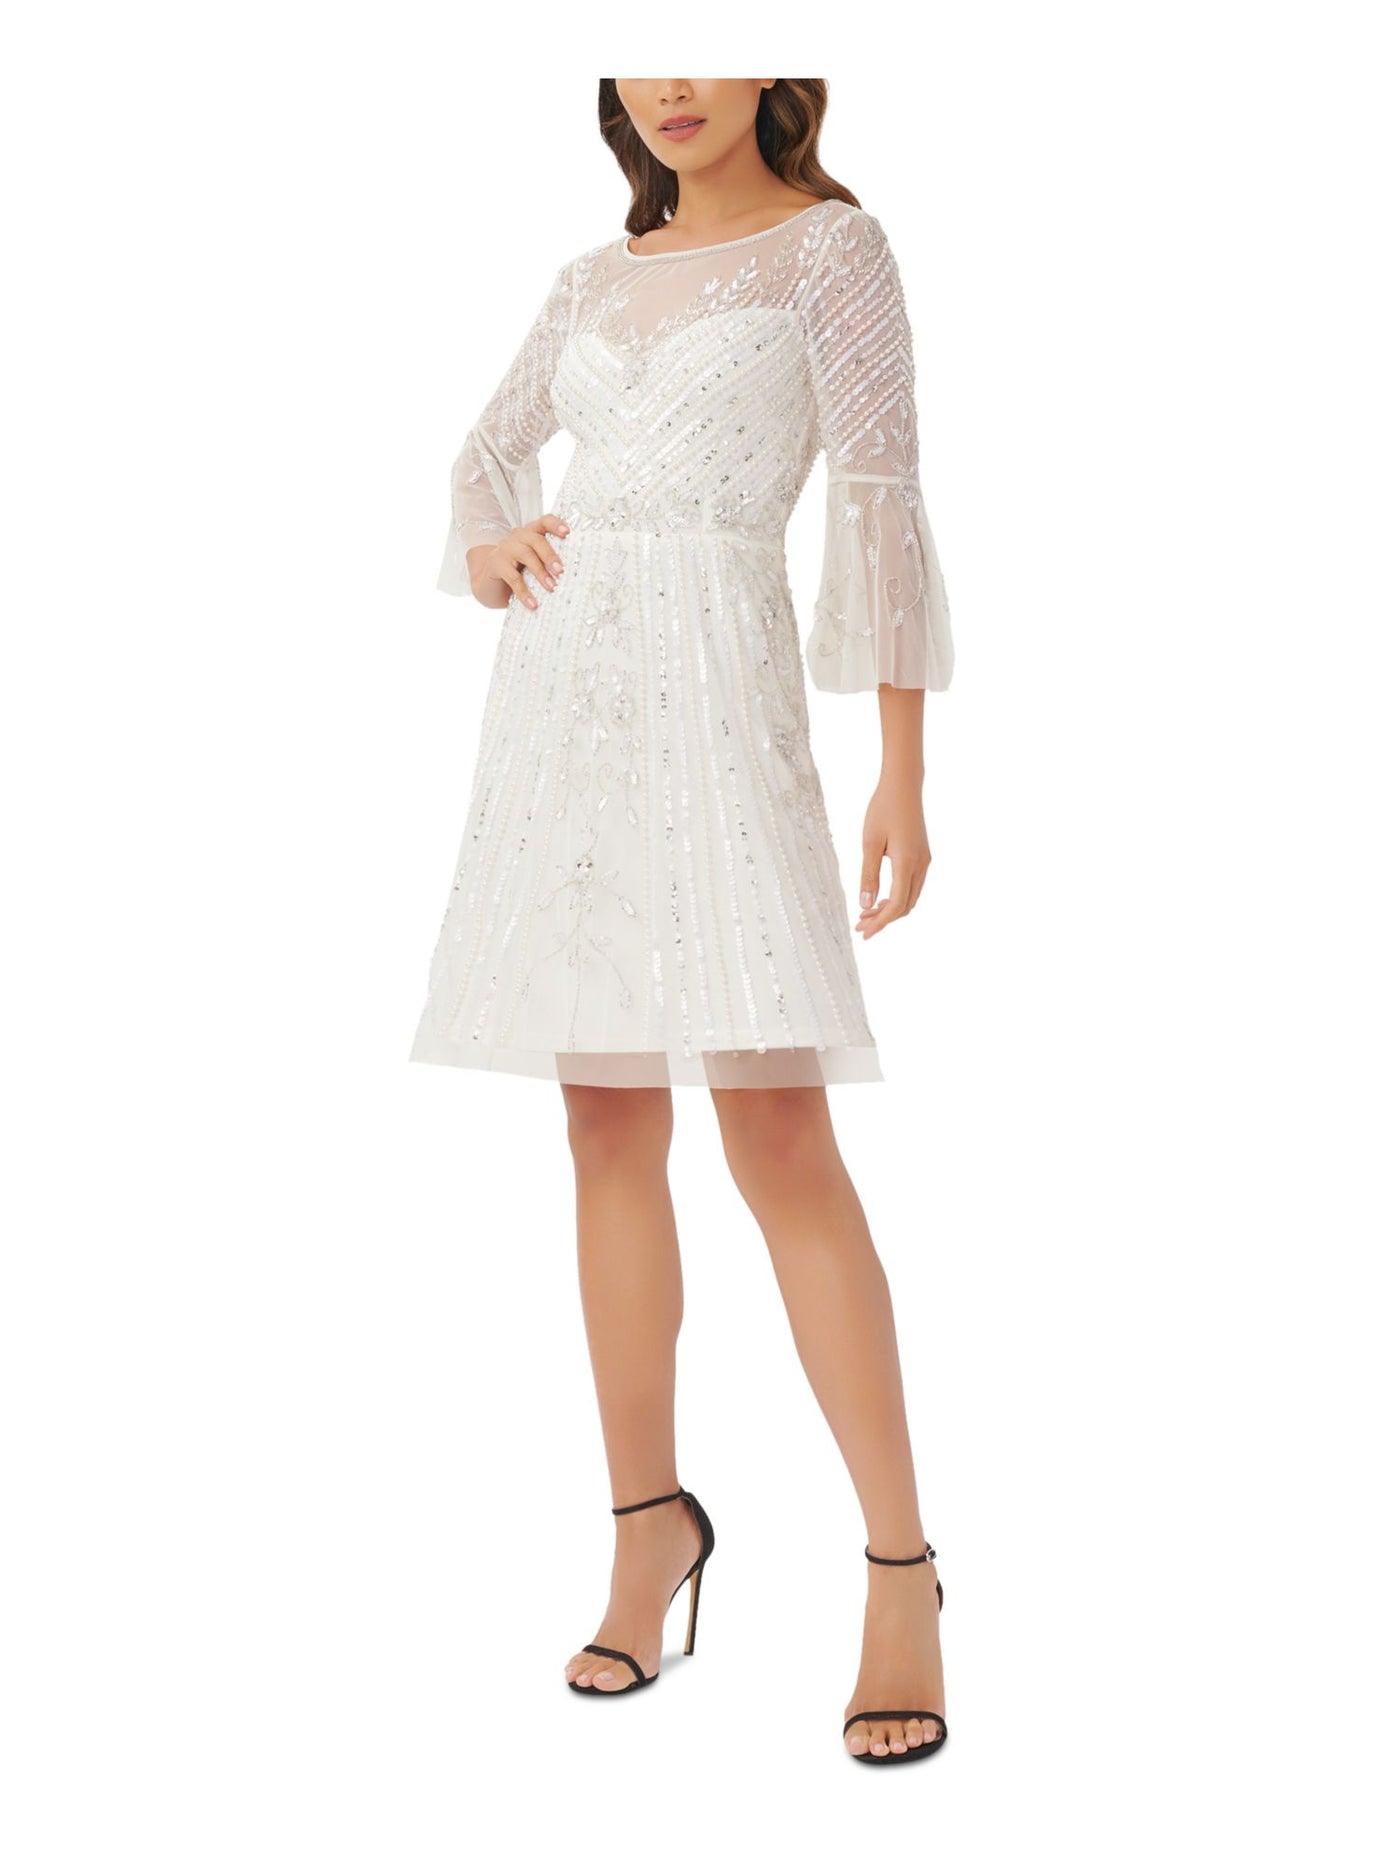 ADRIANNA PAPELL Womens Ivory Beaded Sequined Lined Zippered Long Sleeve Crew Neck Short Cocktail Fit + Flare Dress 2